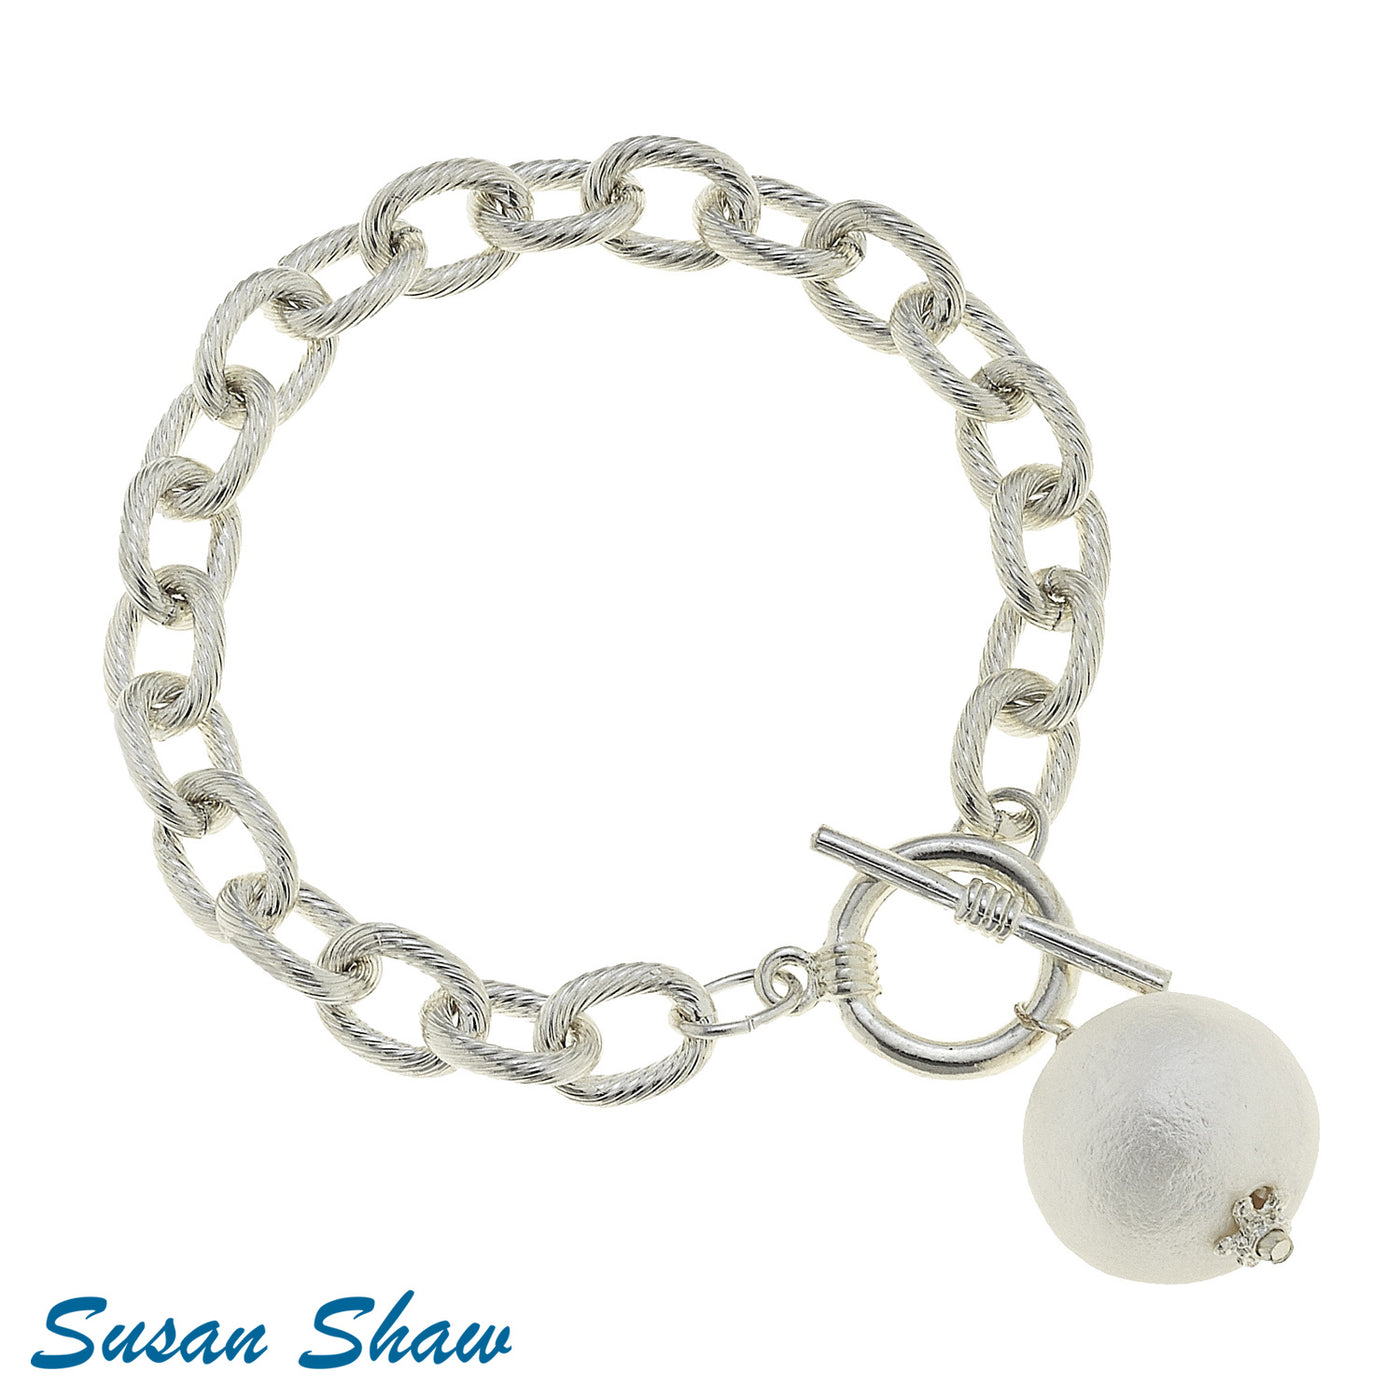 Silver and Cotton Pearl Toggle Bracelet - Susan Shaw